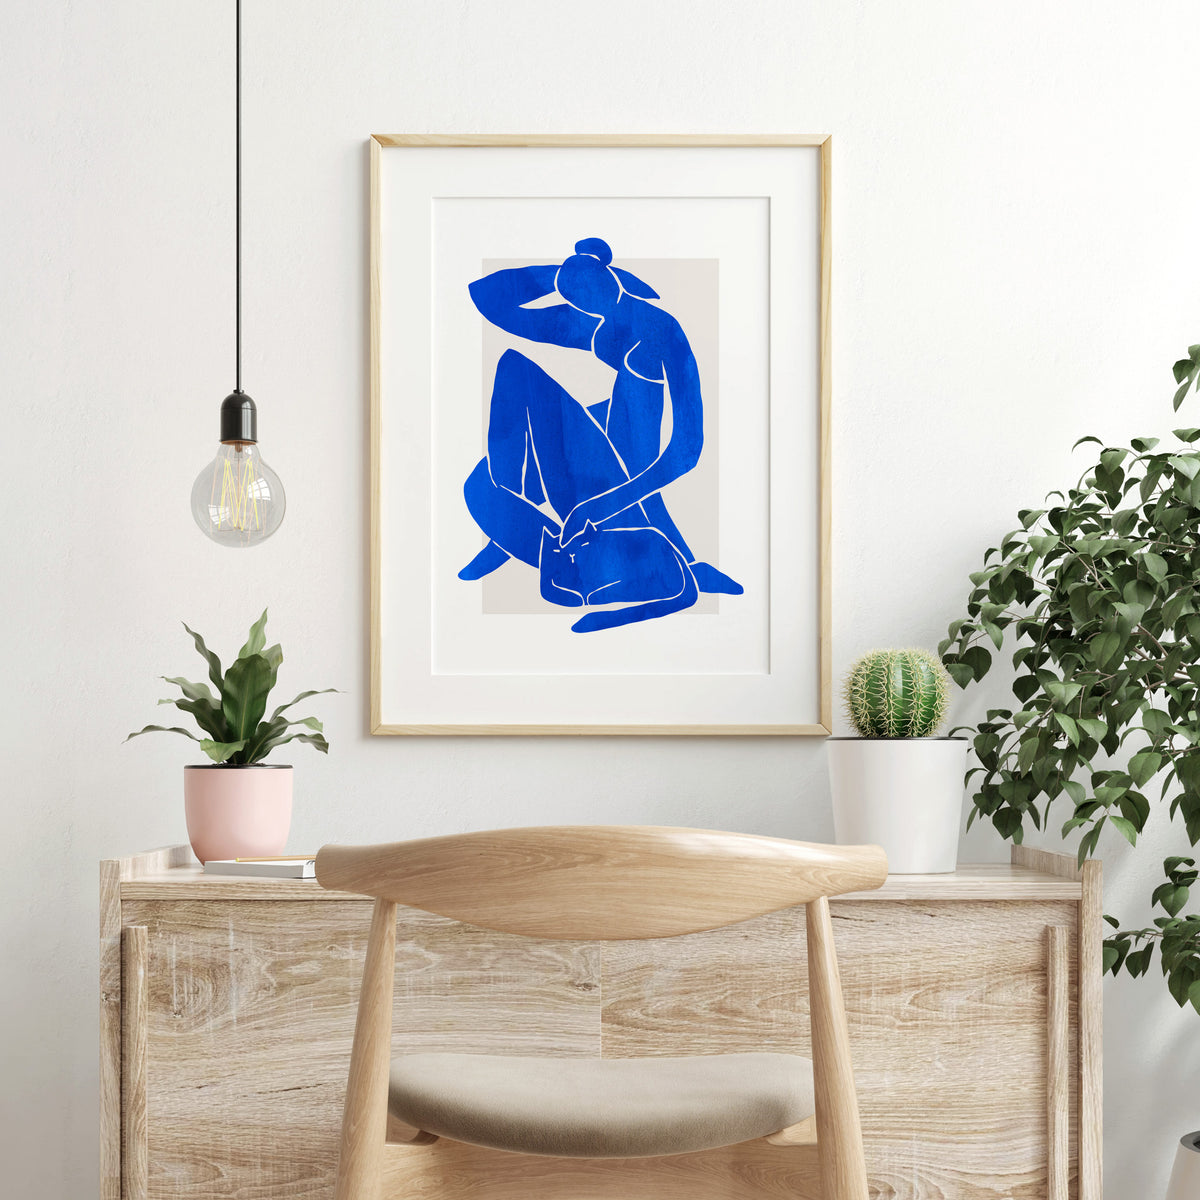 Matisse-Inspired - Blue Nude Abstract Woman Figure With – Prints